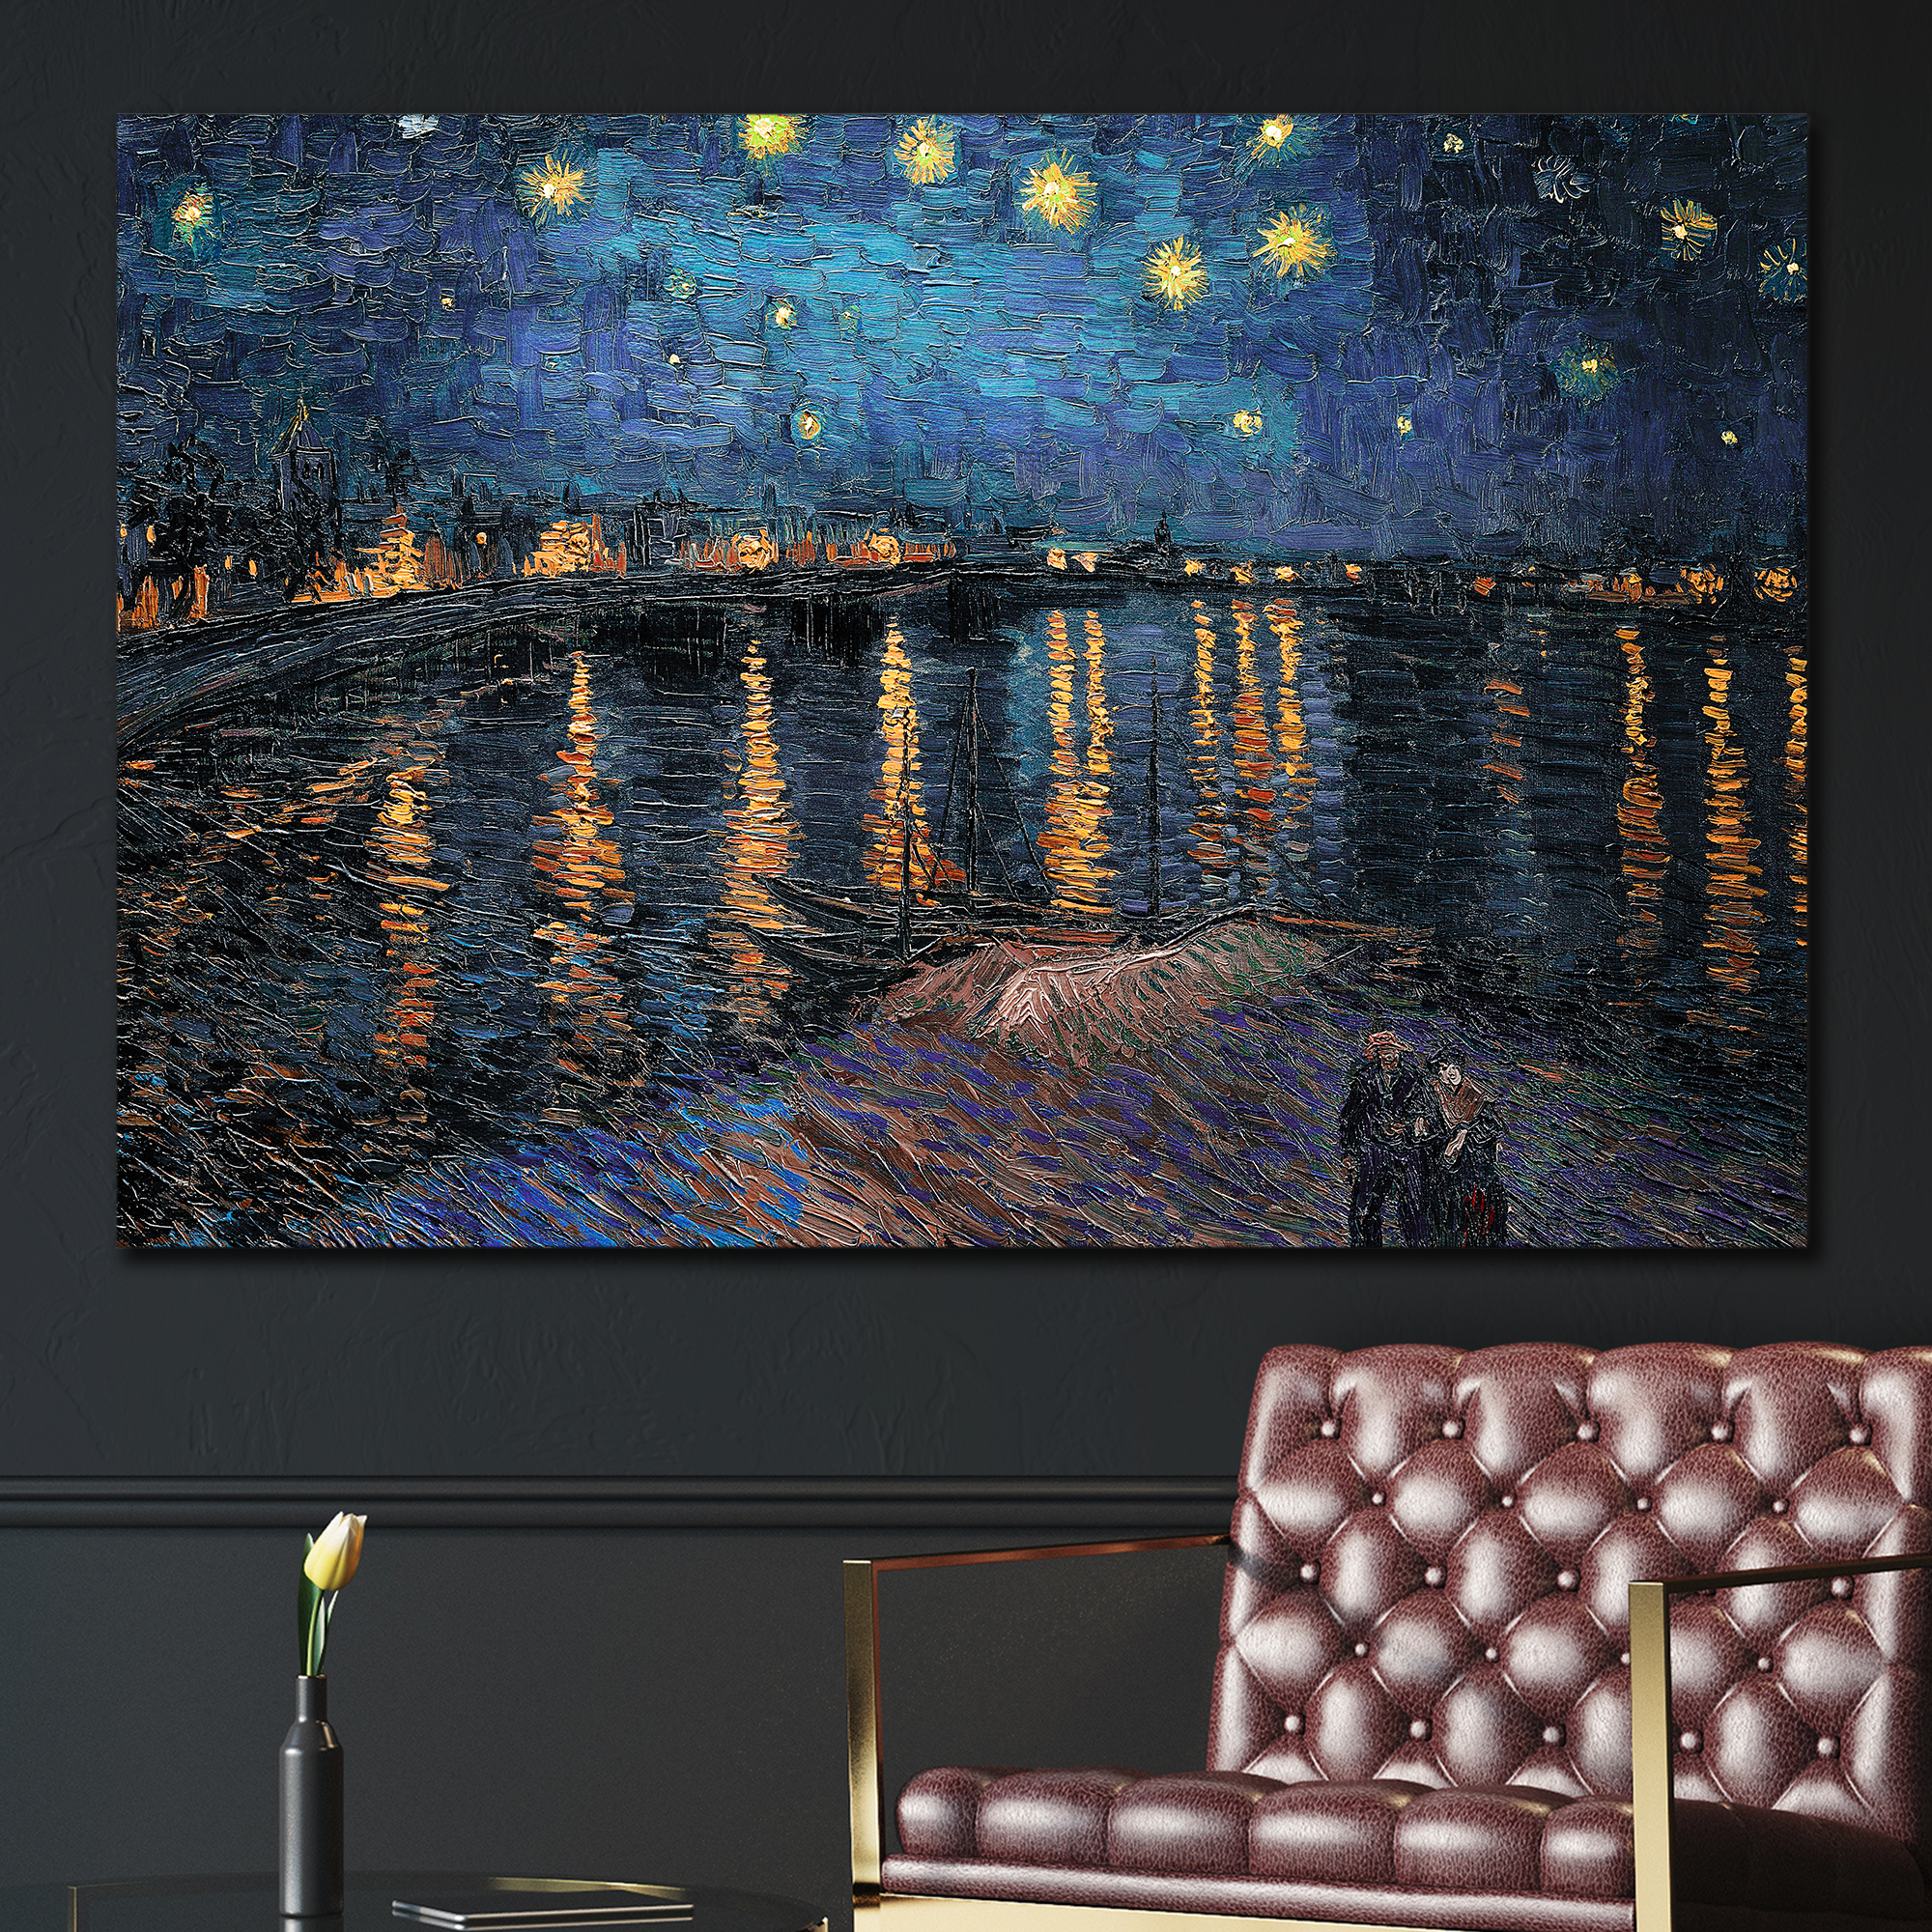 Starry Night Over The Rhone Vincent Van Gogh - Oil Painting Reproduction on Canvas Prints Wall Art, Ready to Hang - 16x24 inches